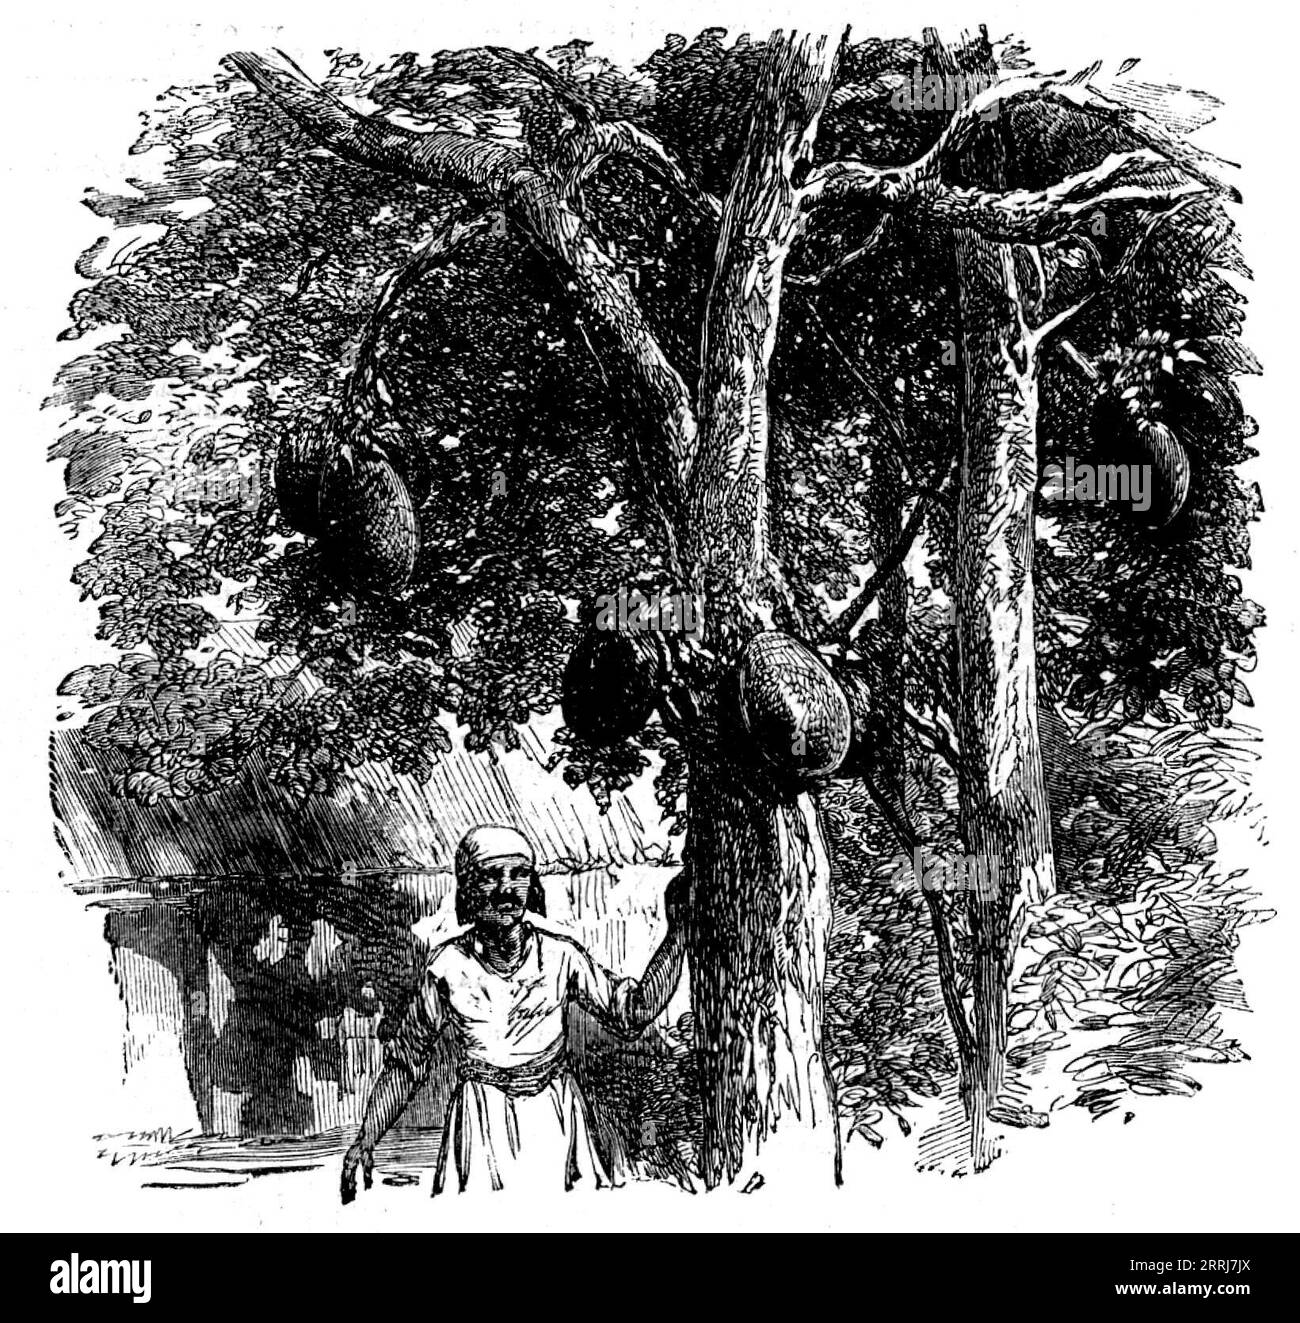 Sketches from Madagascar - Bread-fruit - the Artocarpus integrifolia, or Jack-tree, 1858. 'This magnificent tree, whose fruit forms the chief support of the inhabitants of some of the South Sea Islands, has been recently introduced to Mauritius, where its fruit is eaten by the creoles. We copy one of the Illustrations in Mr. Ellis's book [&quot;Three Visits to Madagascar during the Years 1853, 1851, 1856. Including a Journey to the Capital. With Notices of the Natural History of the Country, and of the Present Civilisation of the People.&quot; By the Rev. William Ellis], engraved from a photog Stock Photo